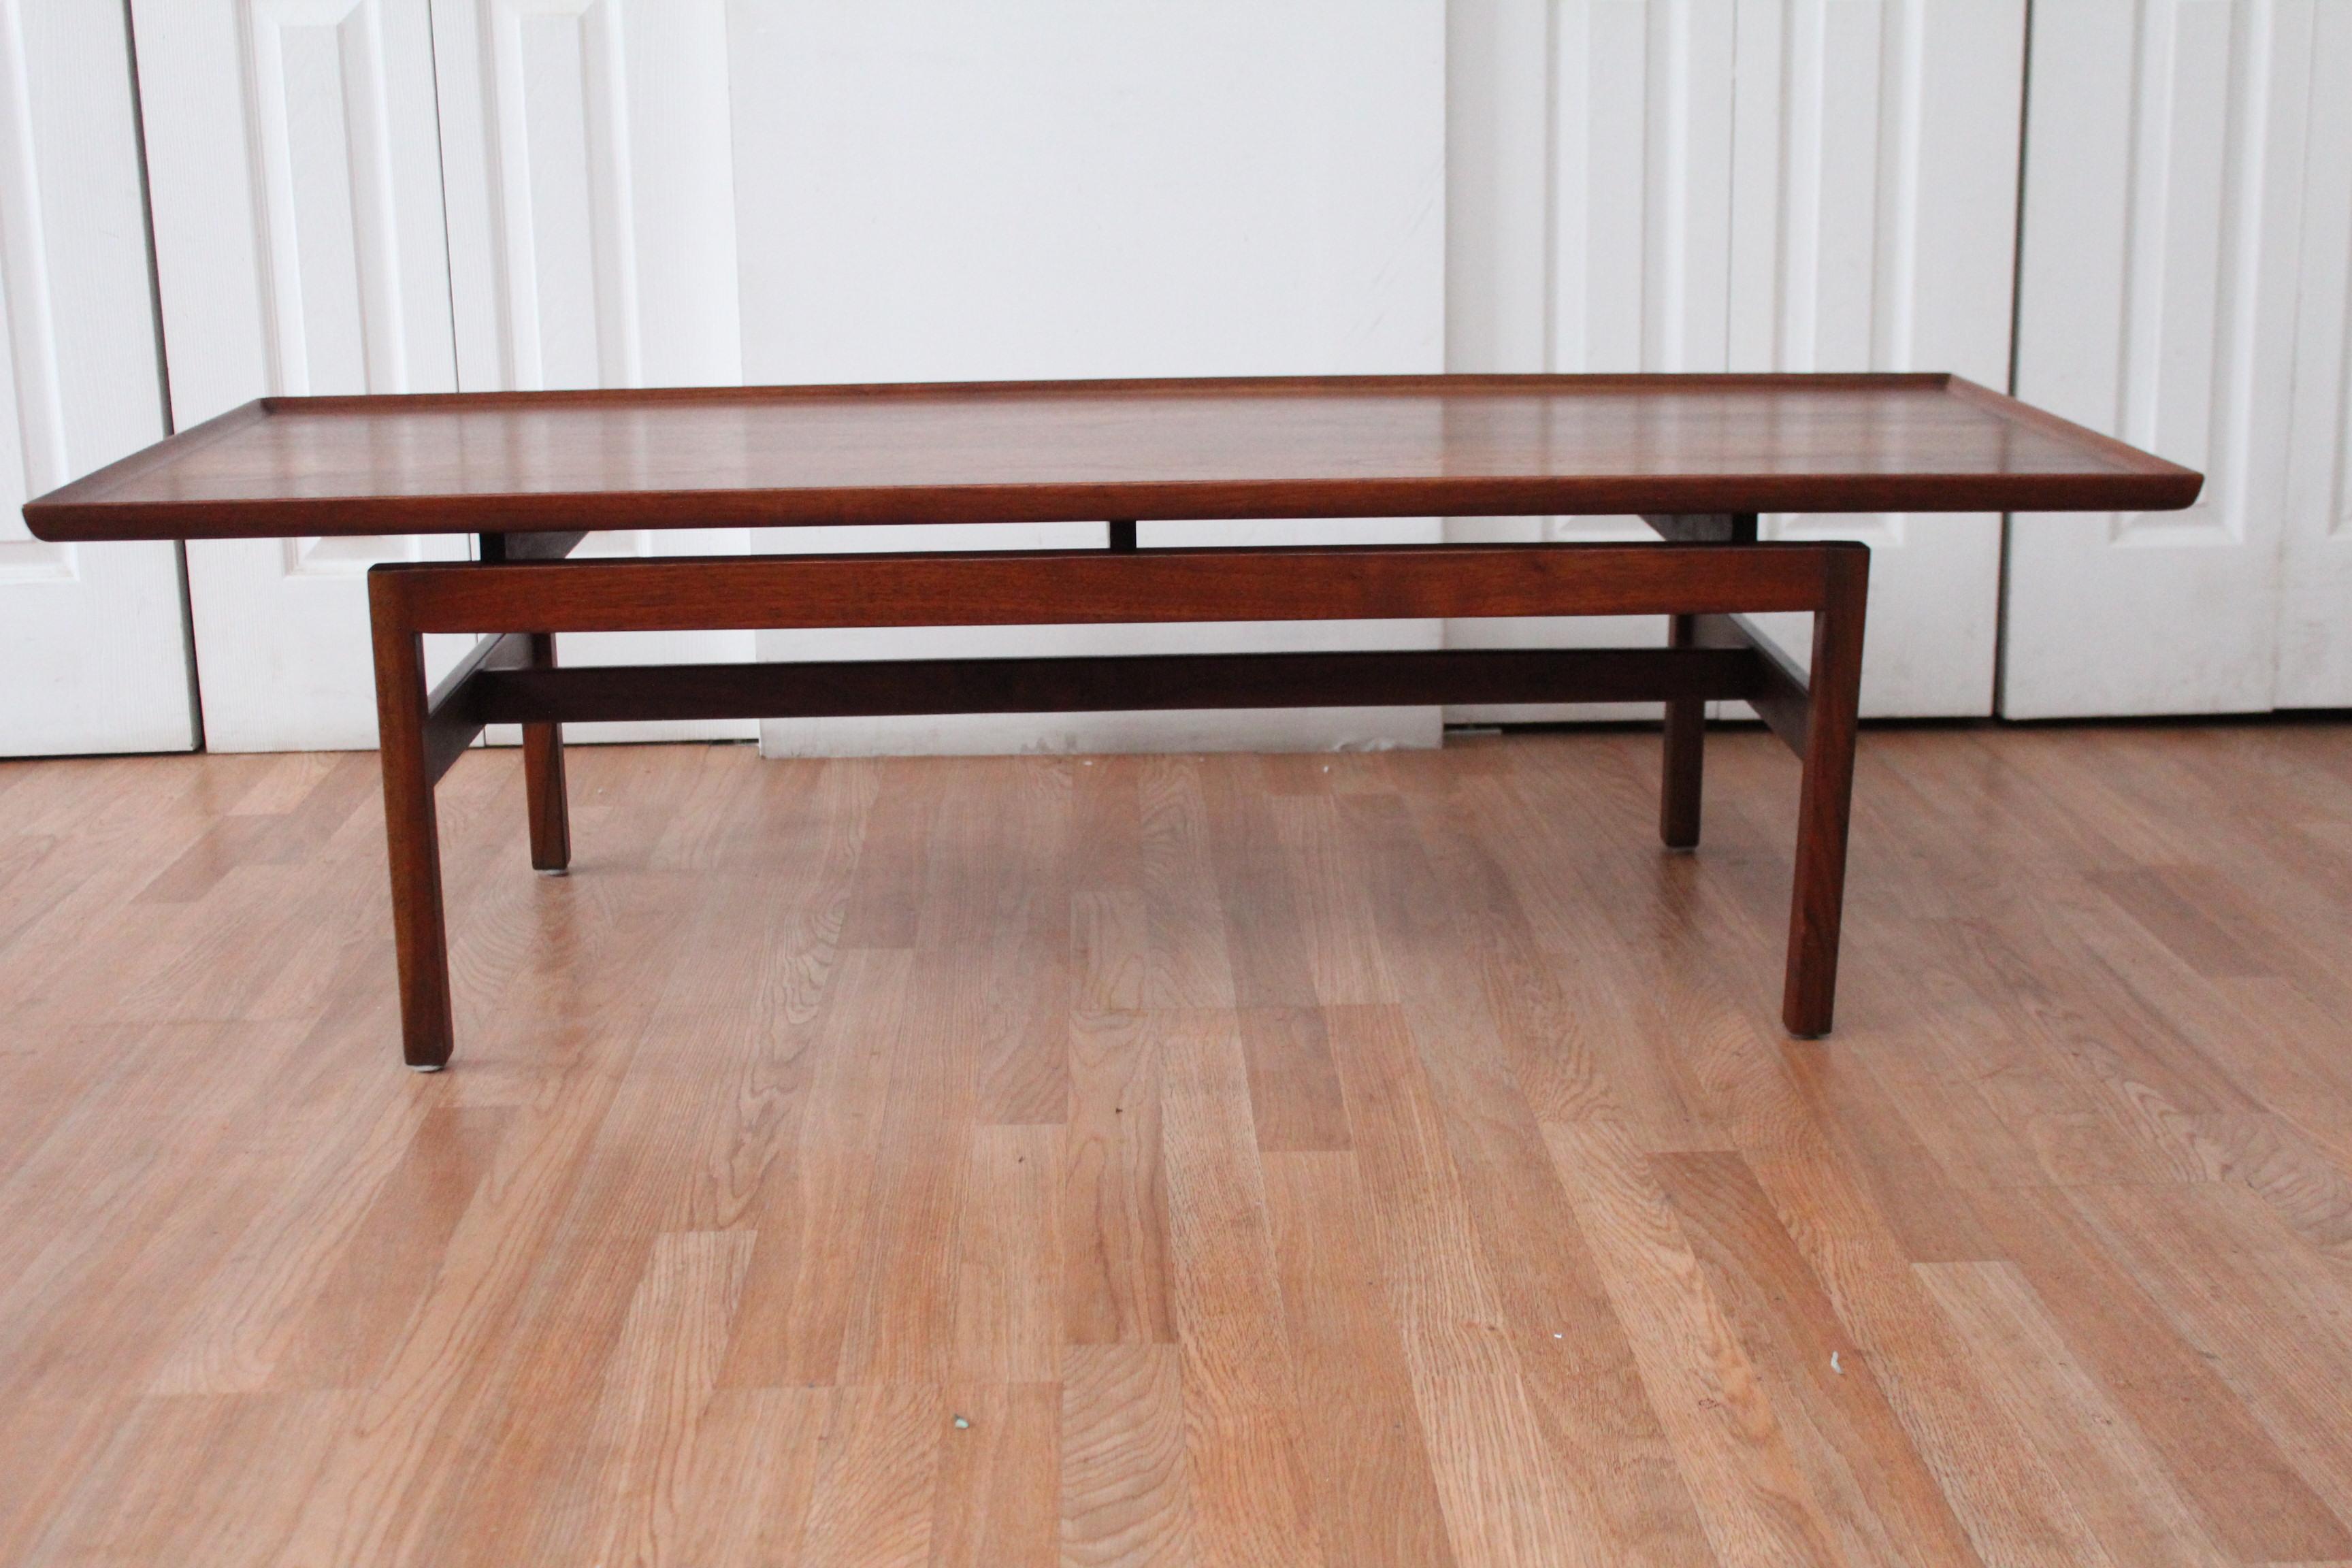 Jens Risom floating top coffee table. Original finish. Beautiful condition.